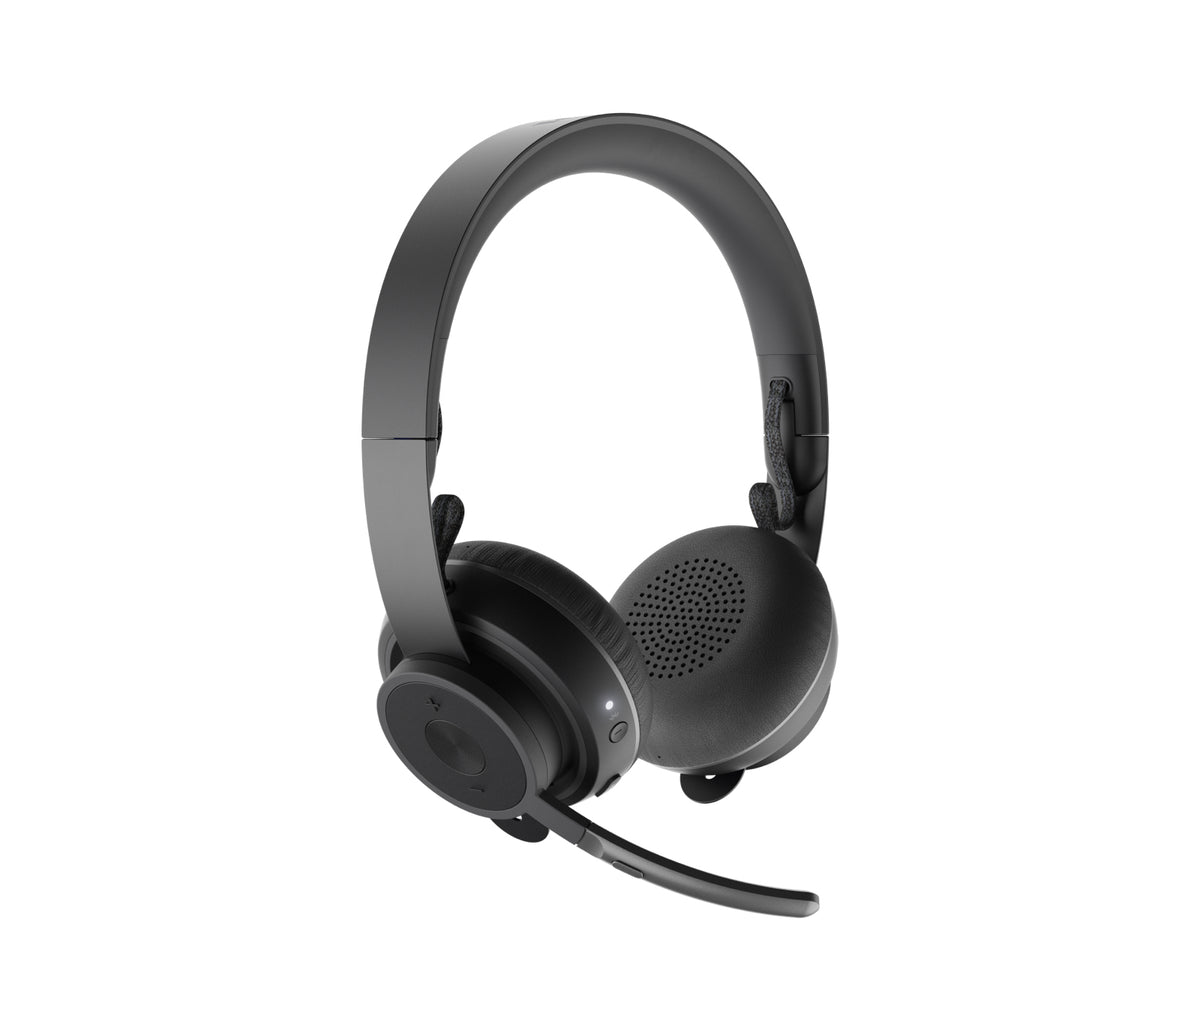 Logitech Zone 900 - Headphones - in ear - bluetooth - wireless - active noise cancellation